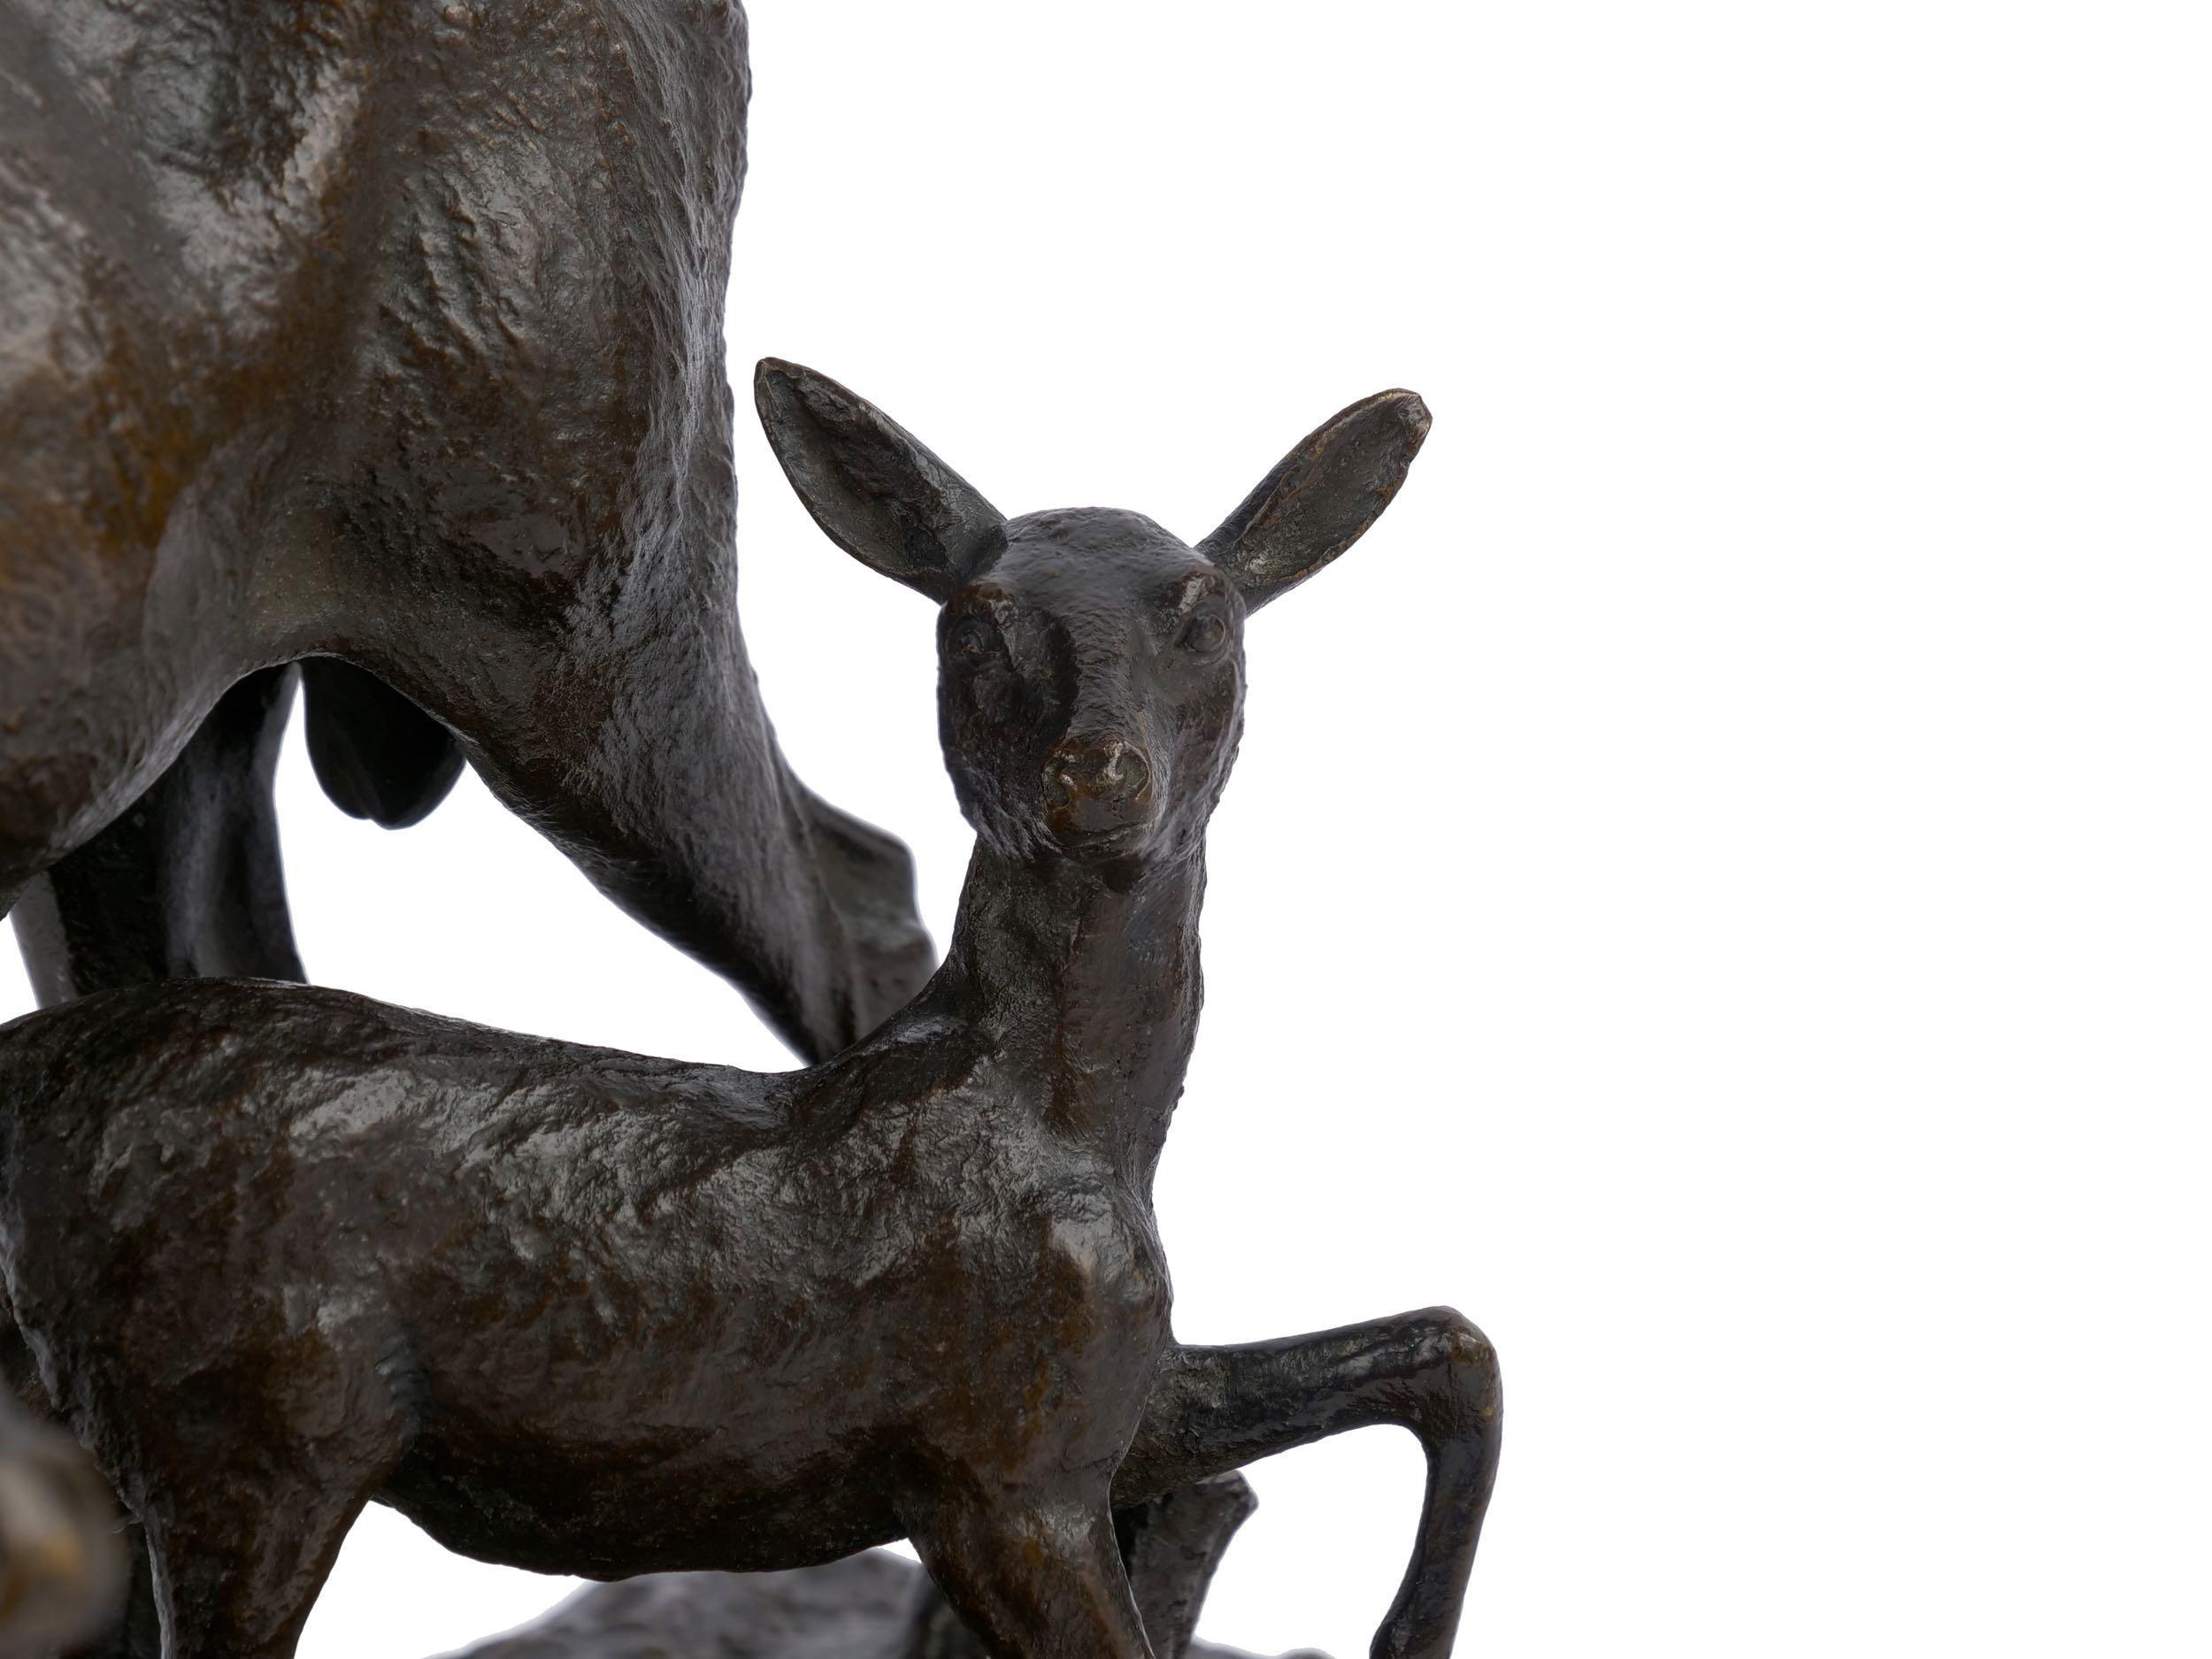 Bronze Sculpture Group “Family of Deer” by Christophe Fratin & Debraux Foundry 3